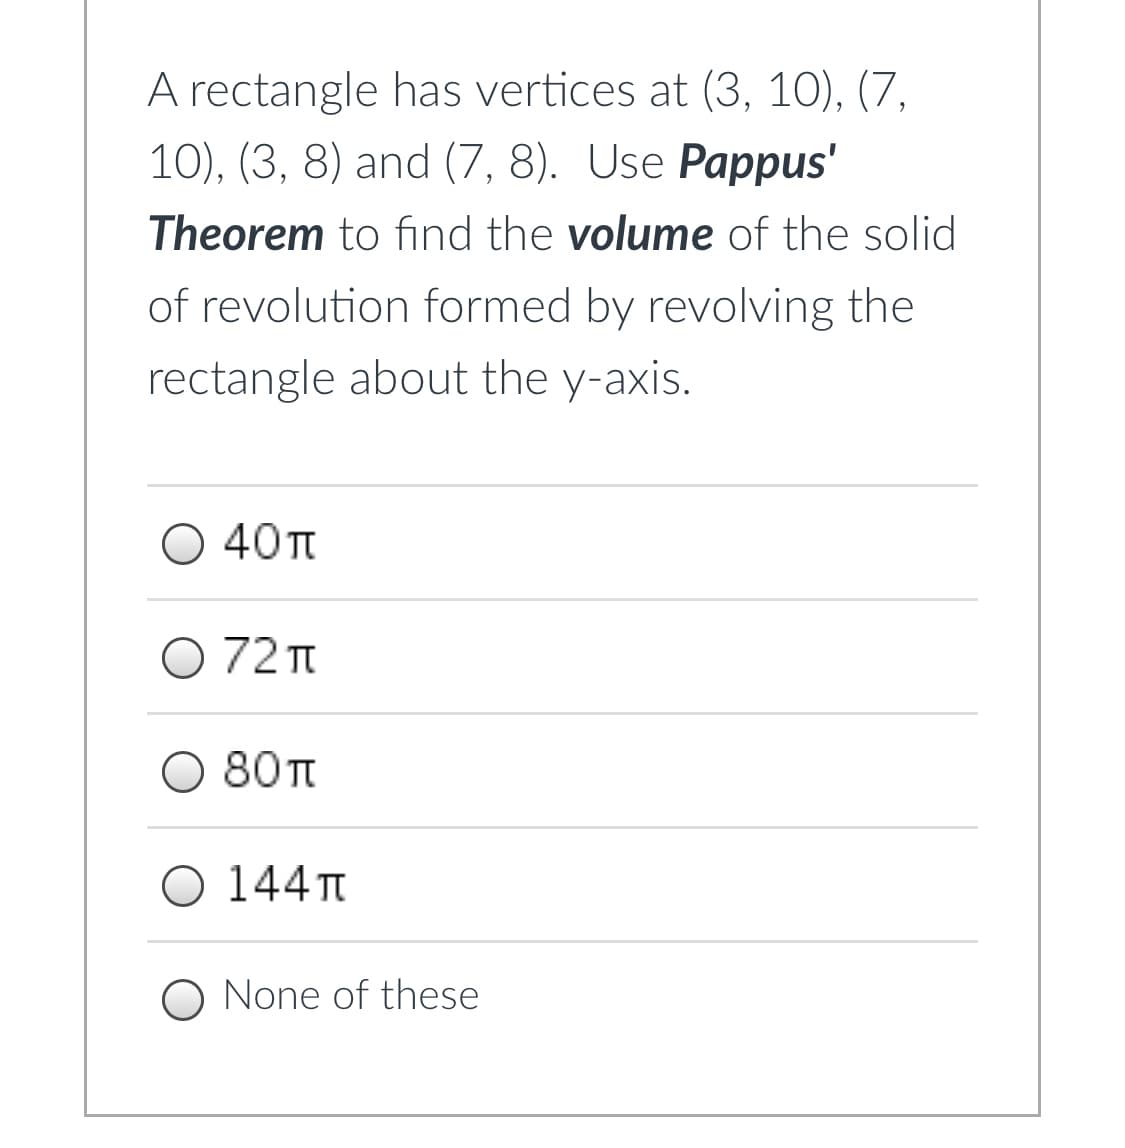 A rectangle has vertices at (3, 10), (7,
10), (3, 8) and (7, 8). Use Pappus'
Theorem to find the volume of the solid
of revolution formed by revolving the
rectangle about the y-axis.
O 40TT
O 72 T
O 80 t
O 144T
O None of these
